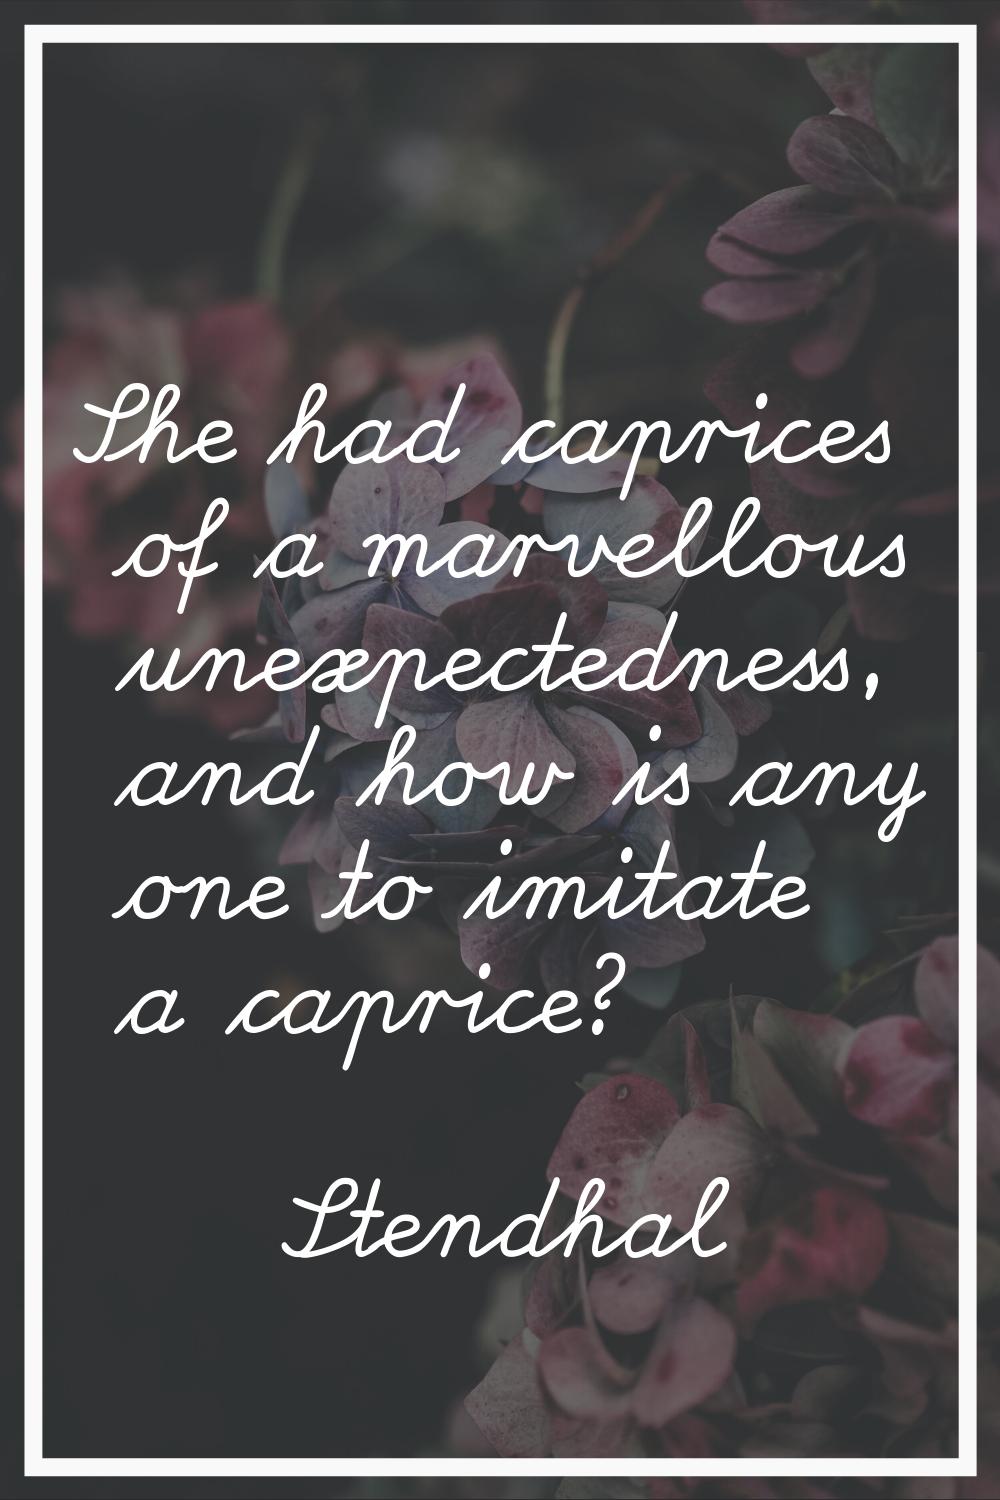 She had caprices of a marvellous unexpectedness, and how is any one to imitate a caprice?